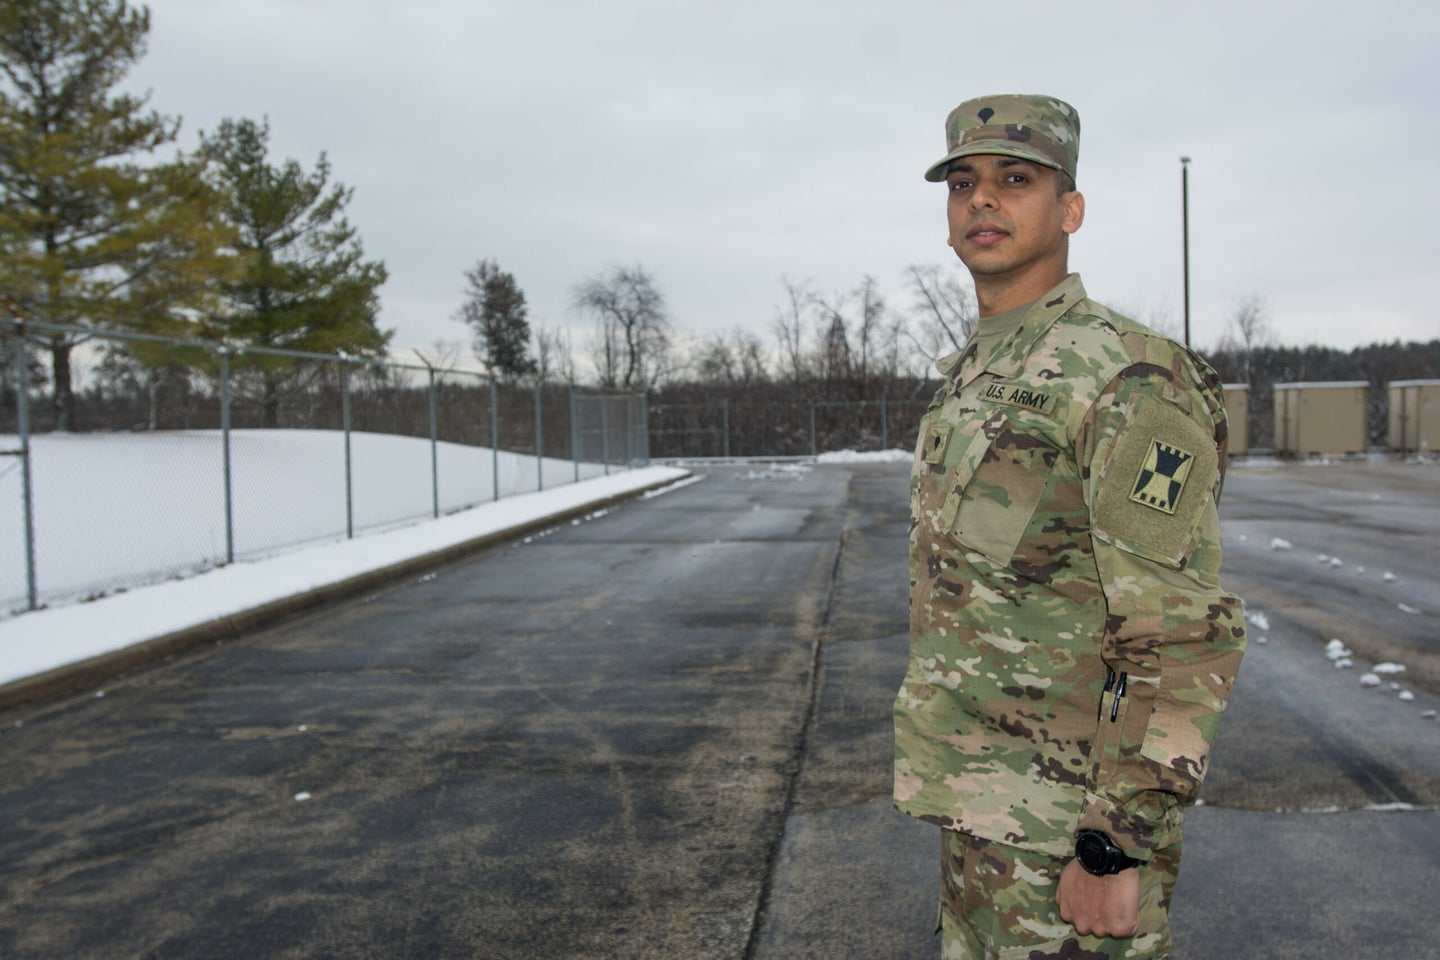 Spc. Abhinav Johri, a combat engineer (12B), at Battle Assembly with the 416th Theater Engineer Command on 4 Jan. 2020.